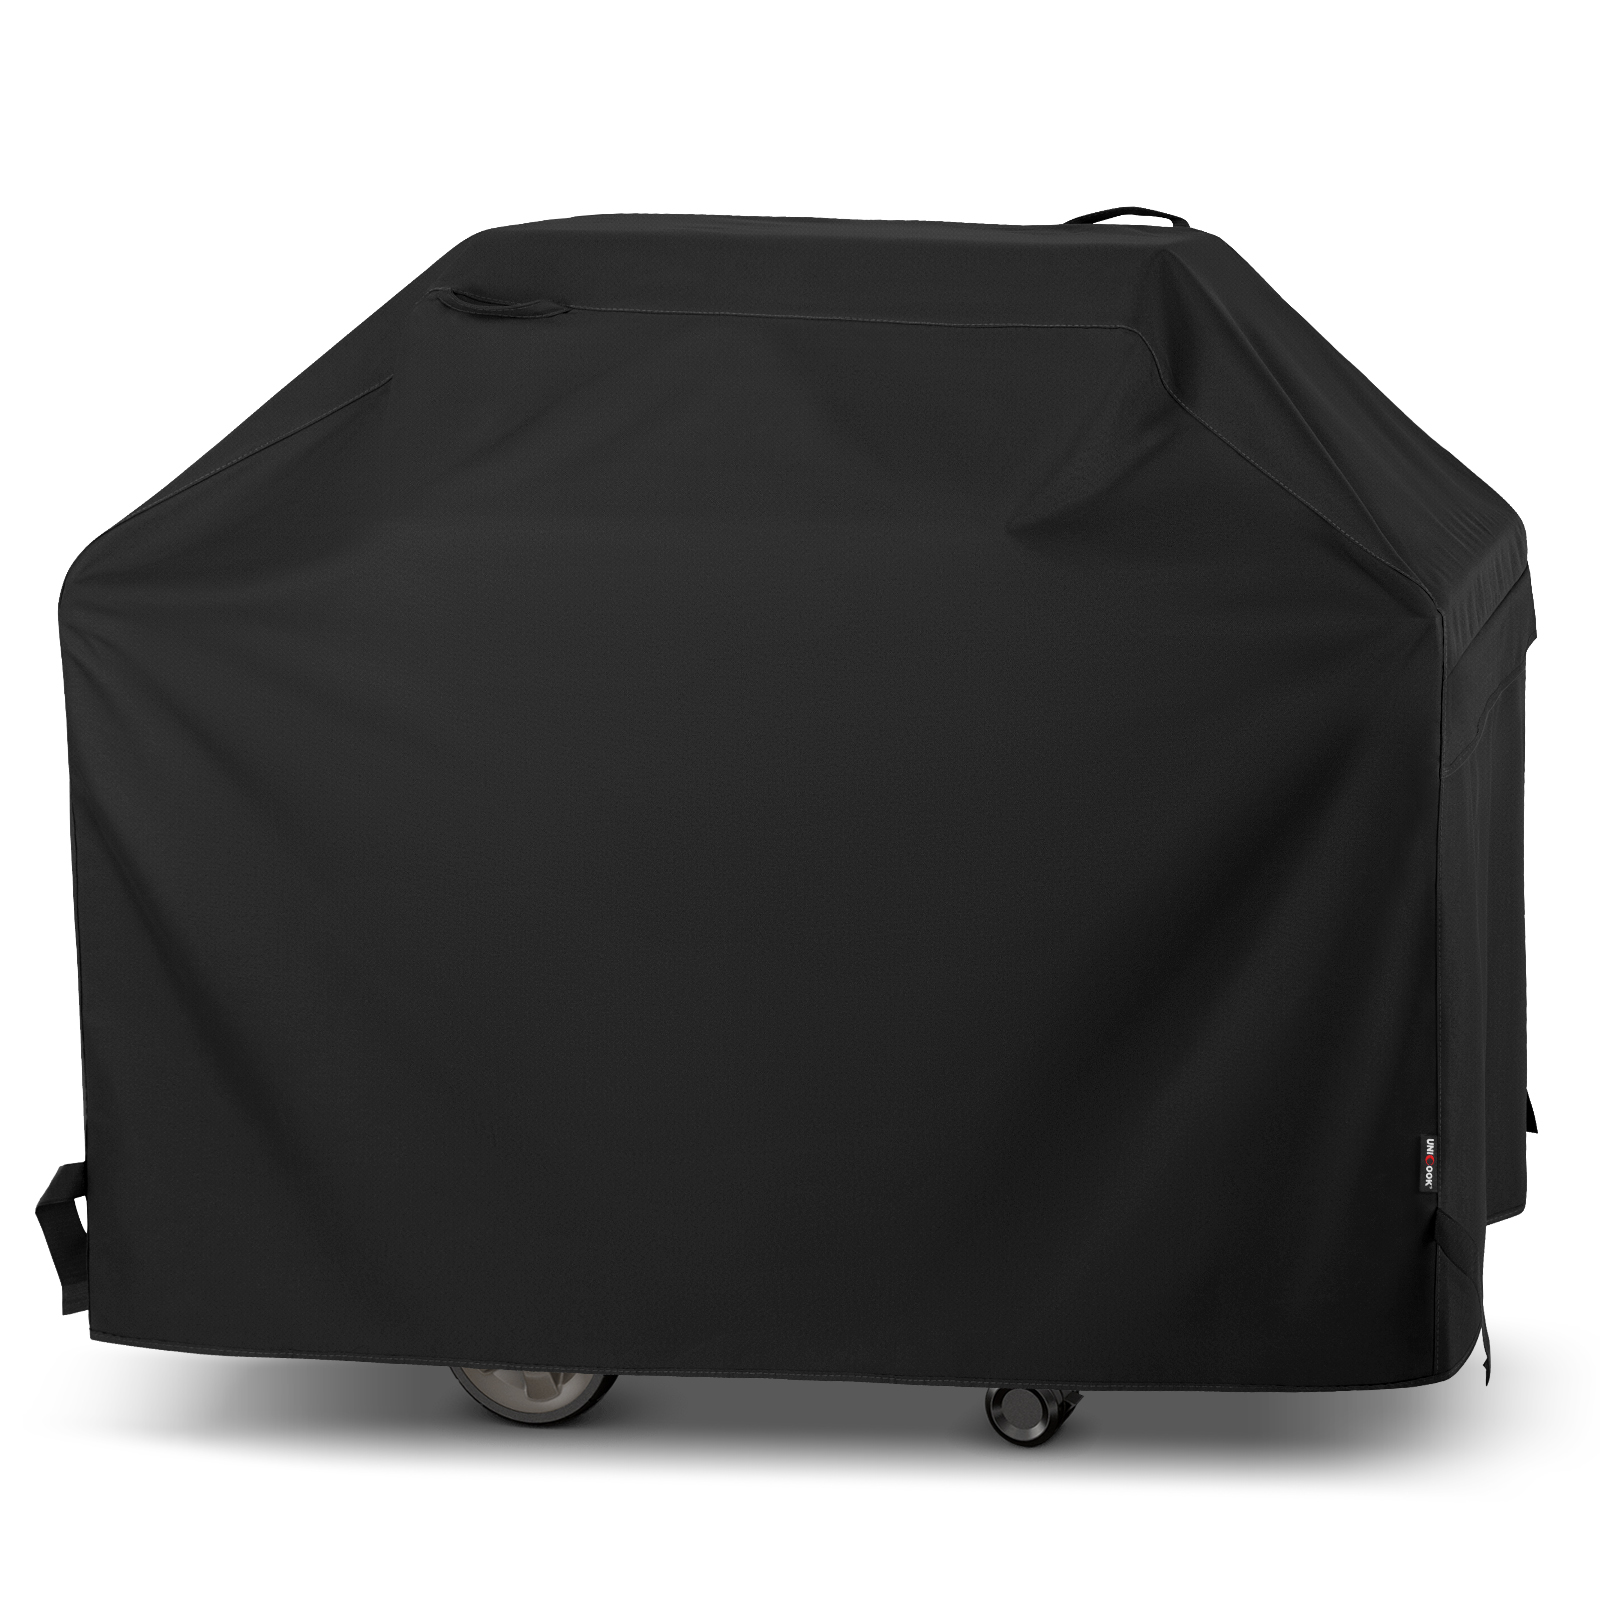 Unicook Heavy Duty Waterproof Grill Cover 55 Inch, Basic Version